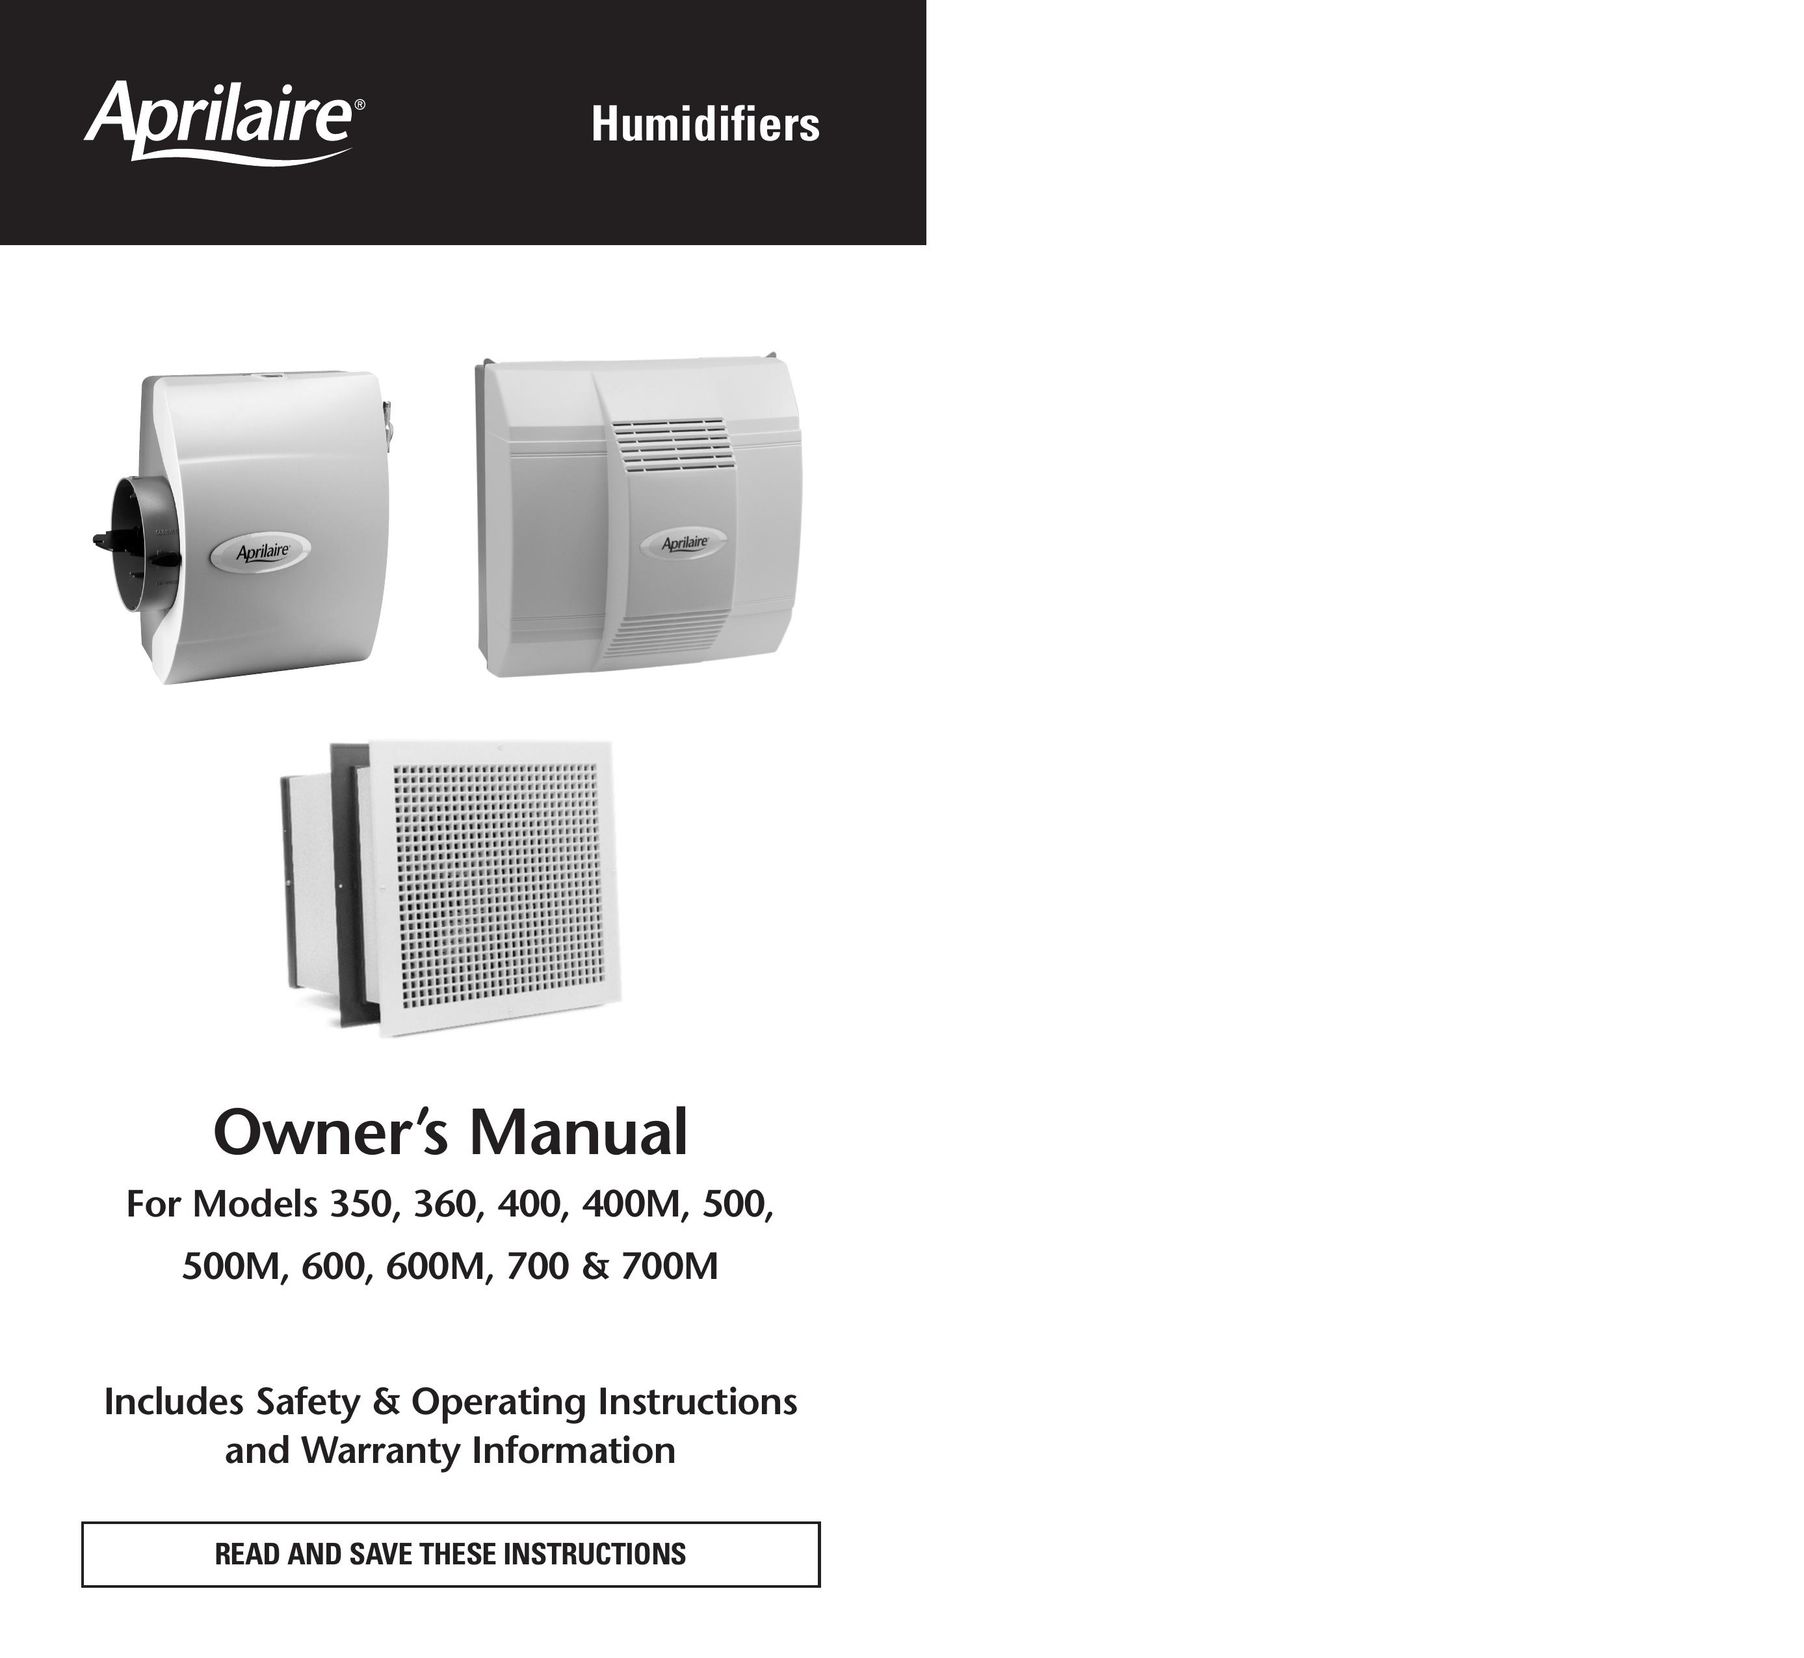 Aprilaire 600M Humidifier User Manual